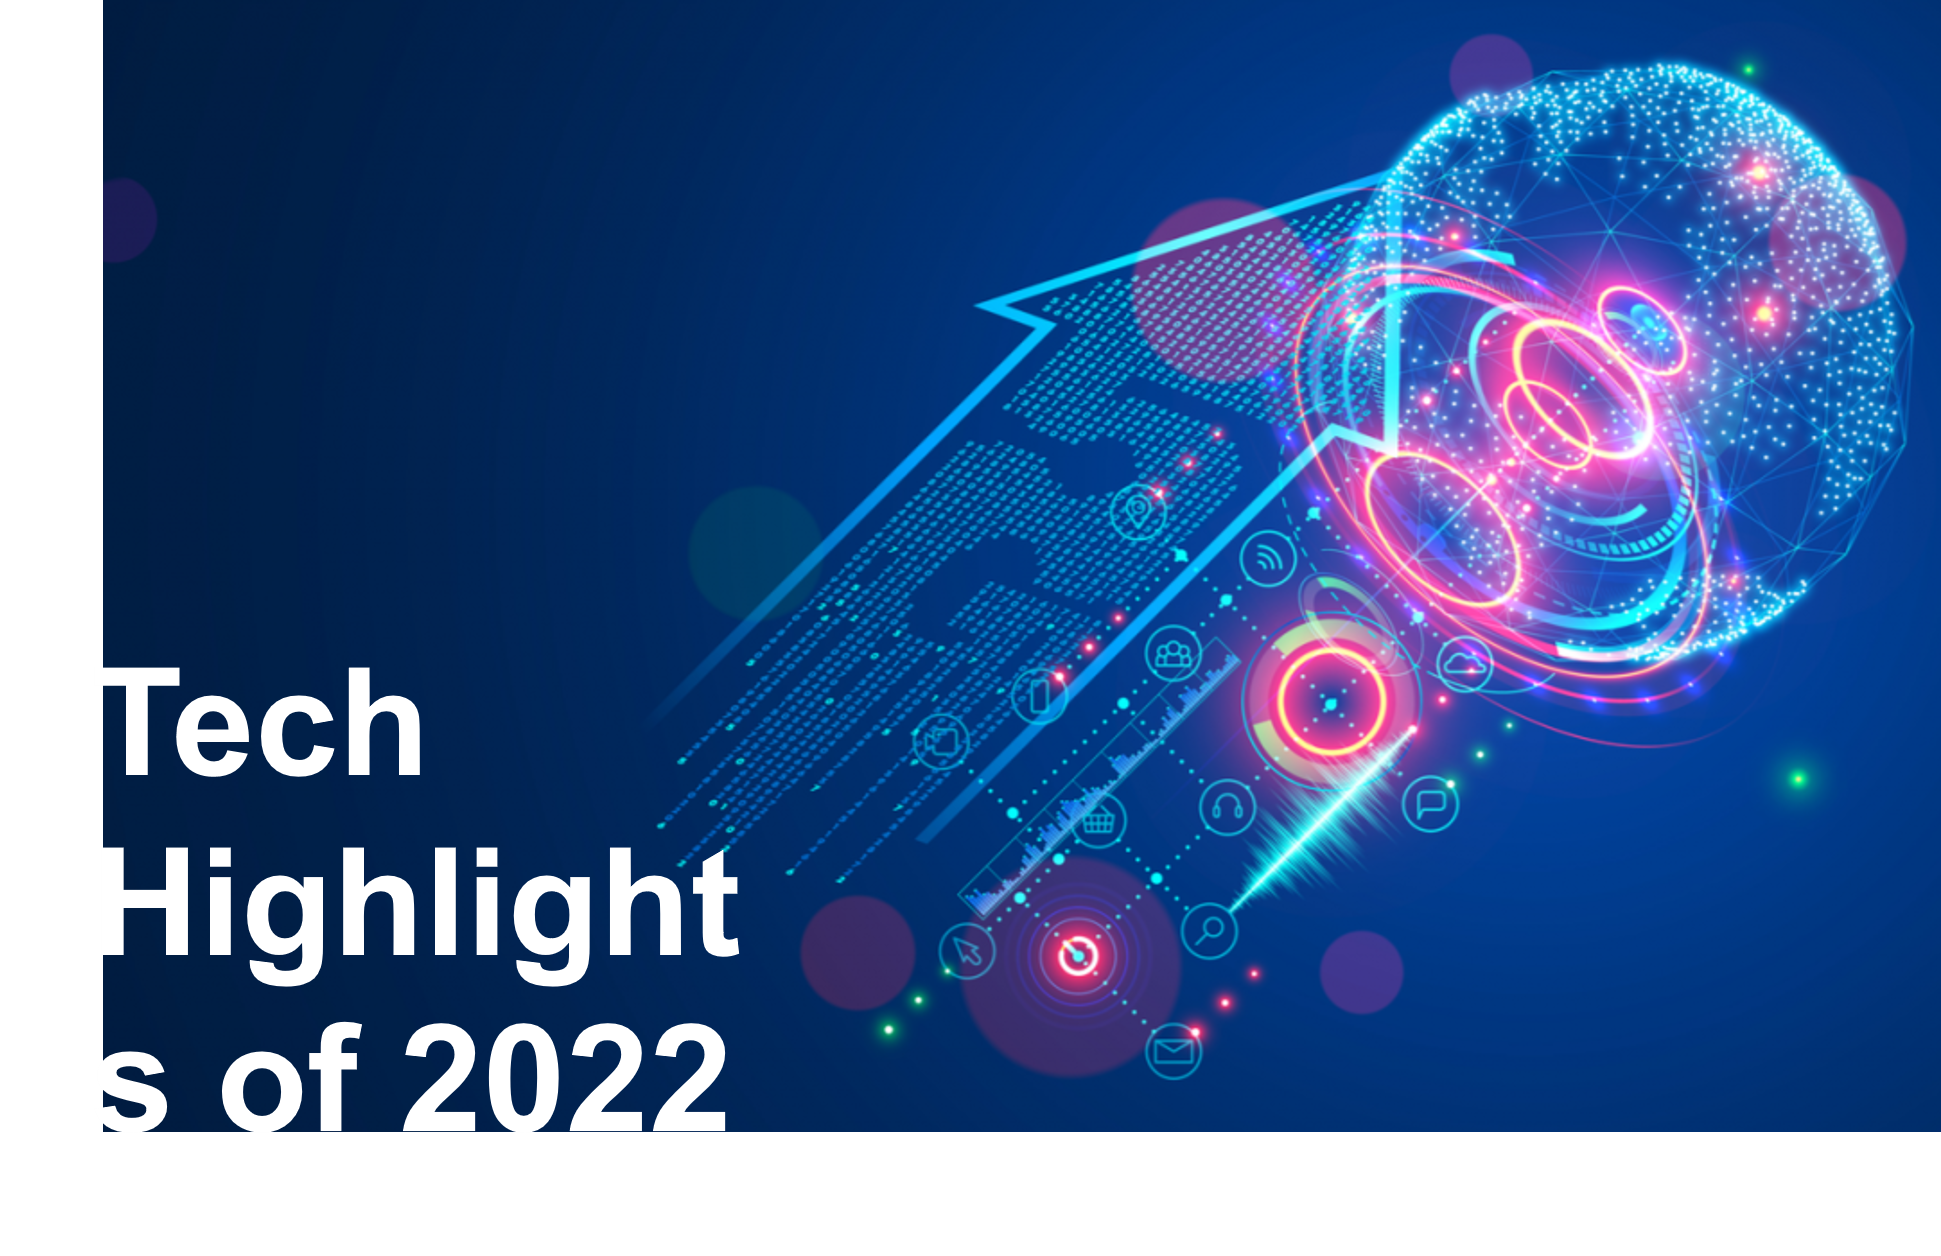 Tech Highlights of 2022: A Year of AI, Blockchain, IoT, 5G, and Electric Vehicles